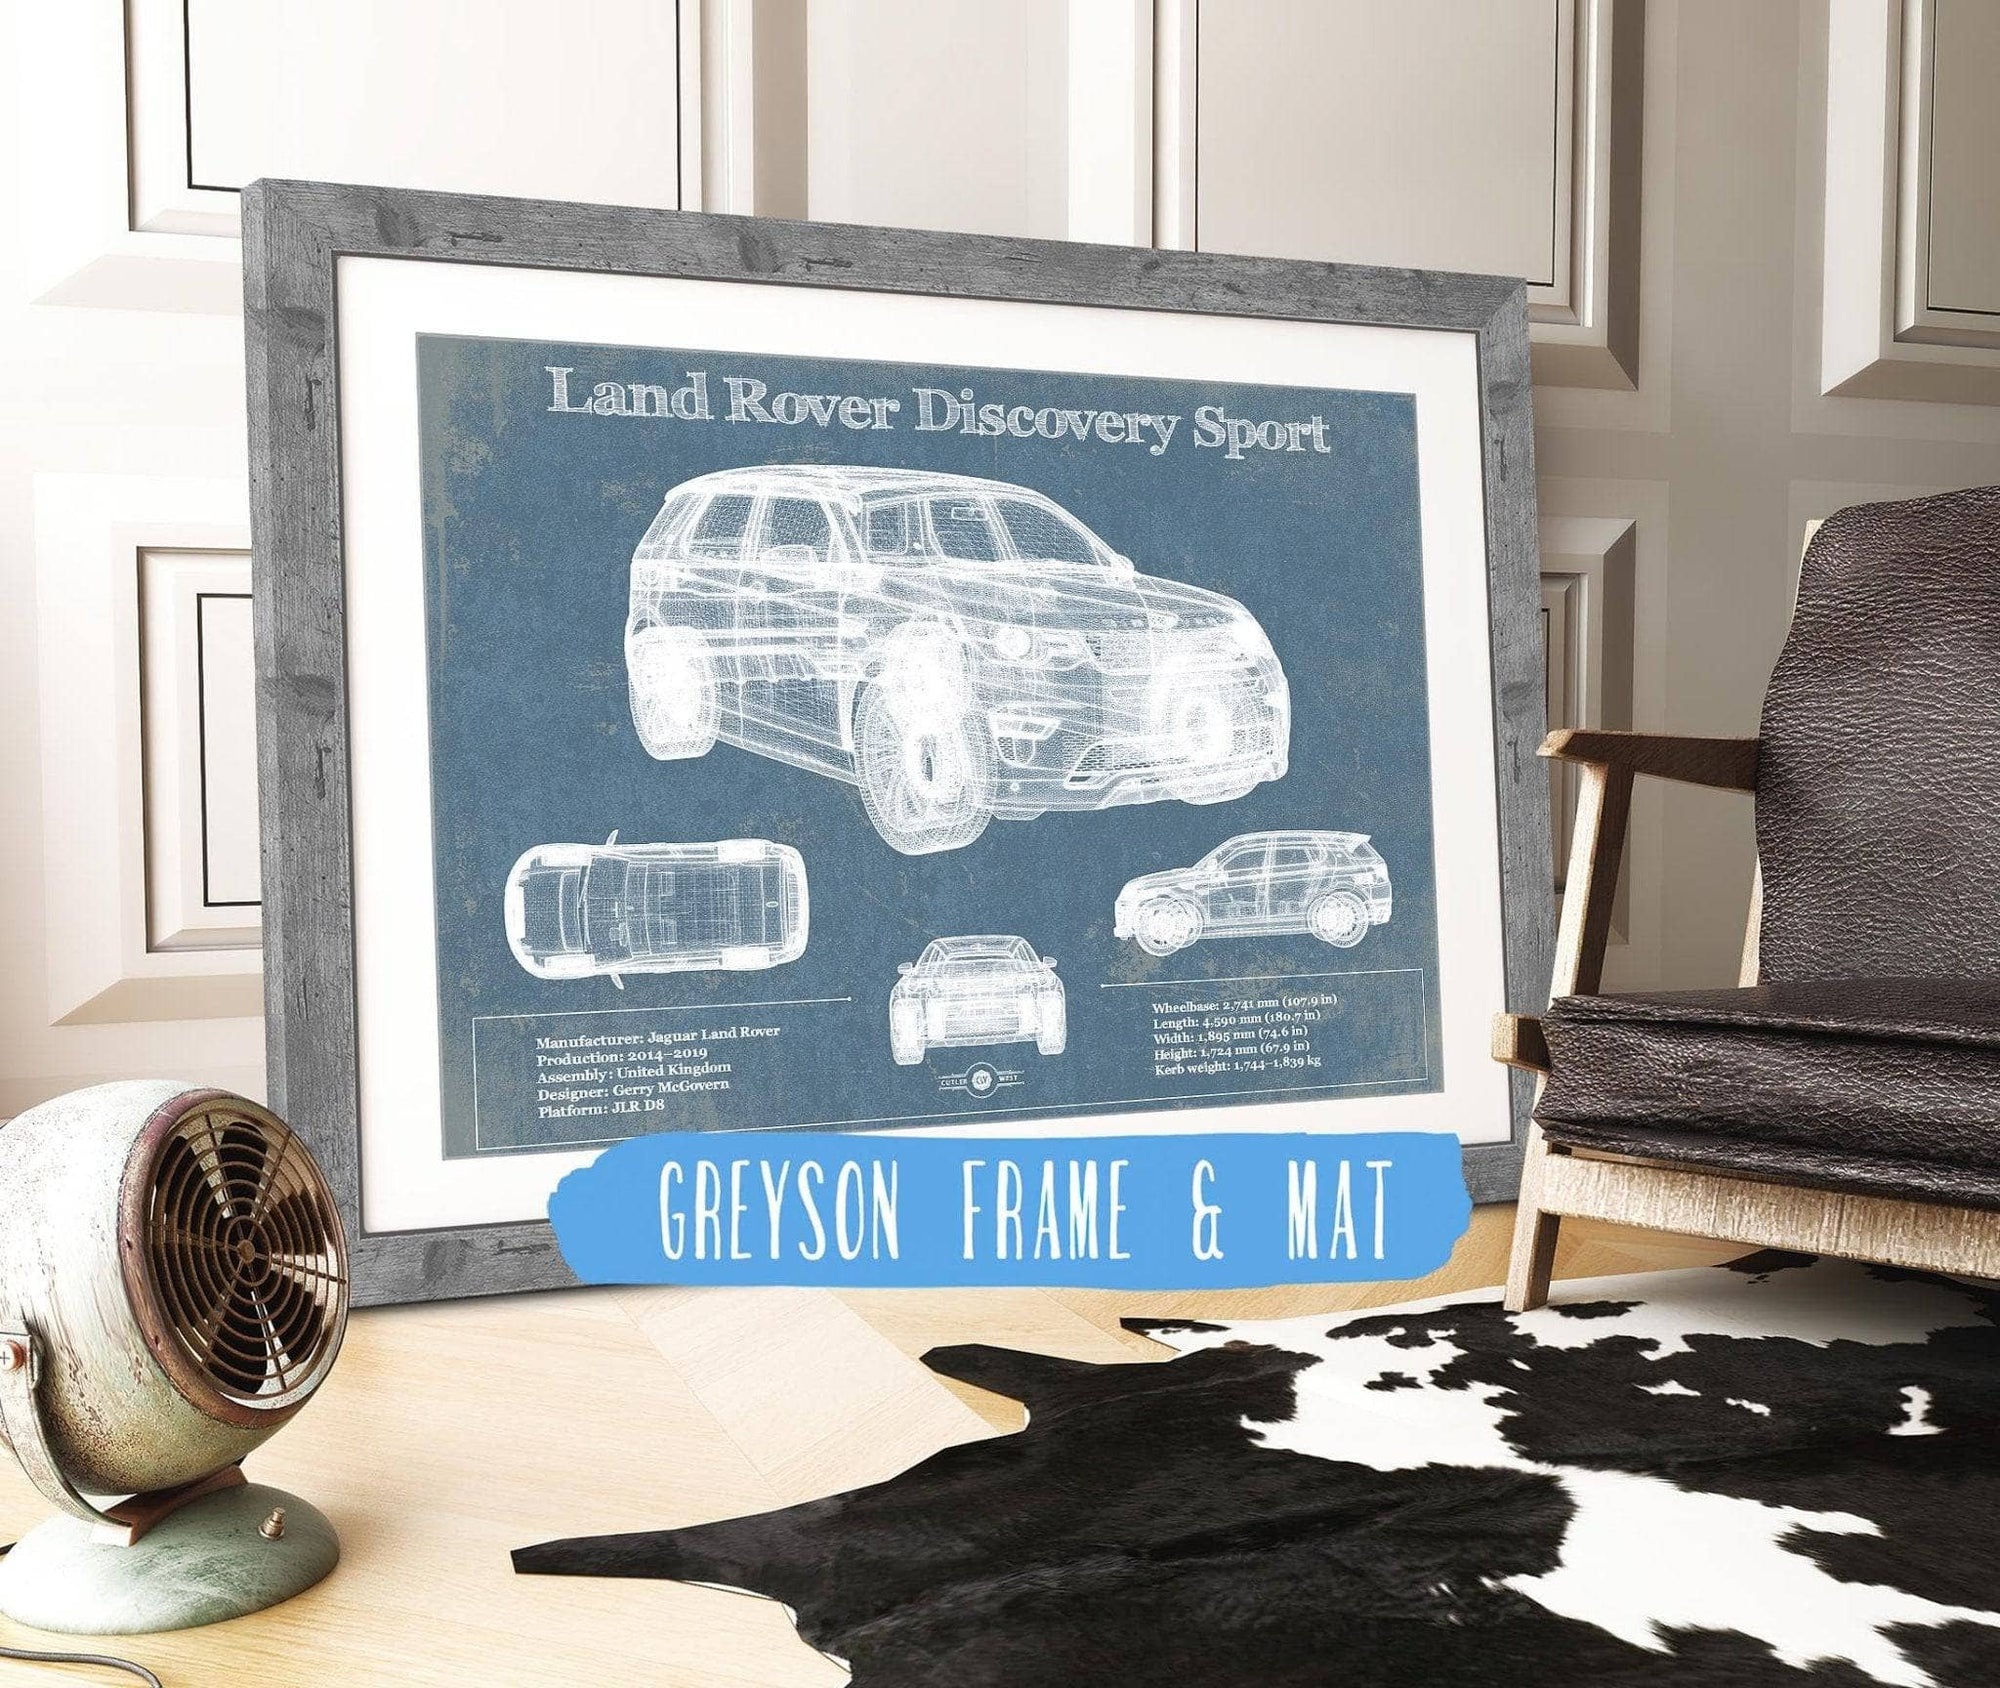 Cutler West Land Rover Collection 14" x 11" / Greyson Frame & Mat Land Rover Discovery Sport Vintage Blueprint Auto Print 845000277_15838